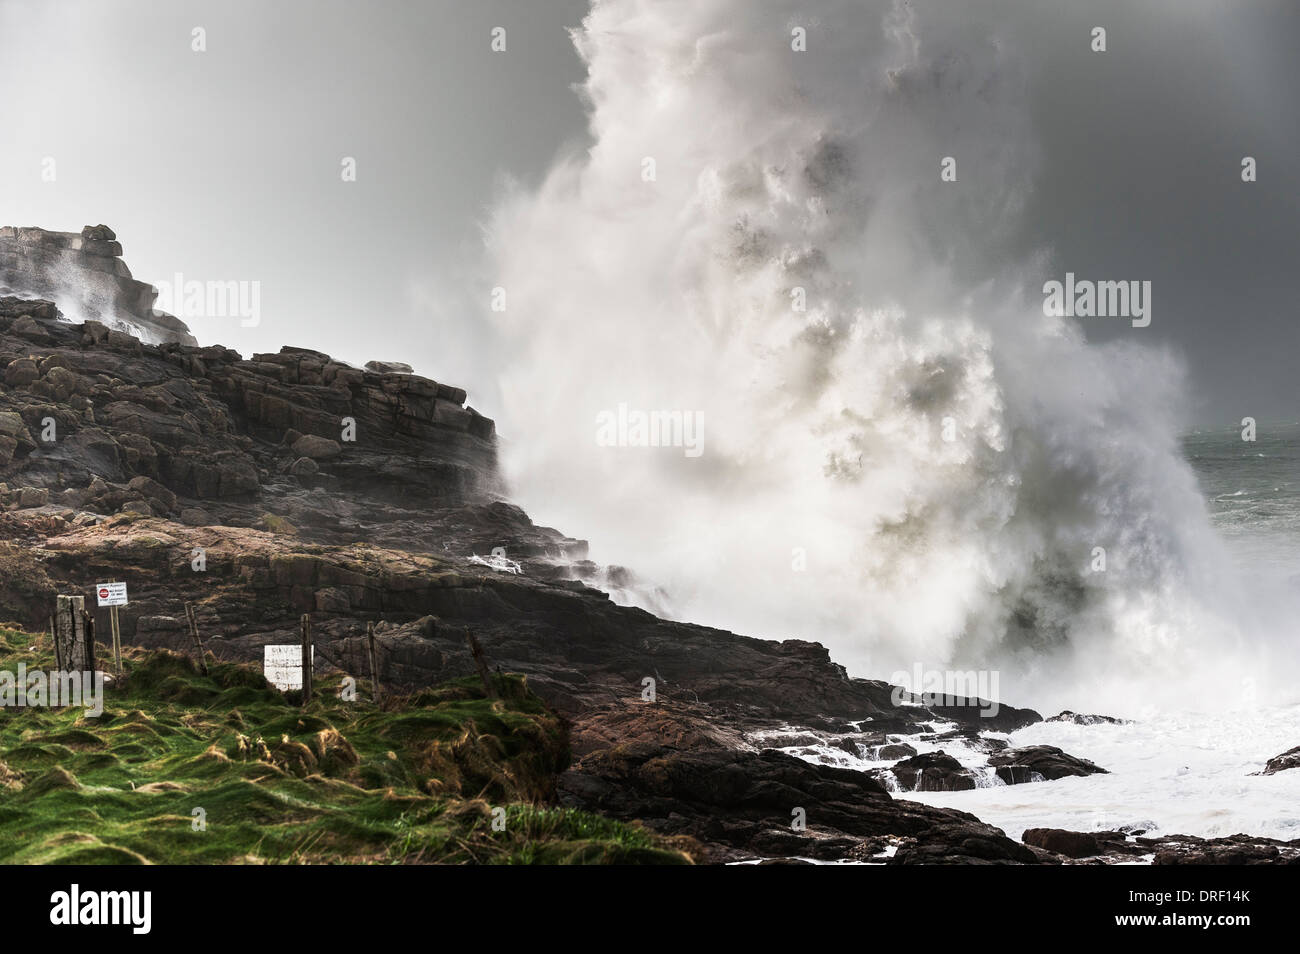 Large waves crash into rocks at Sennen Cove in Cornwall. Stock Photo